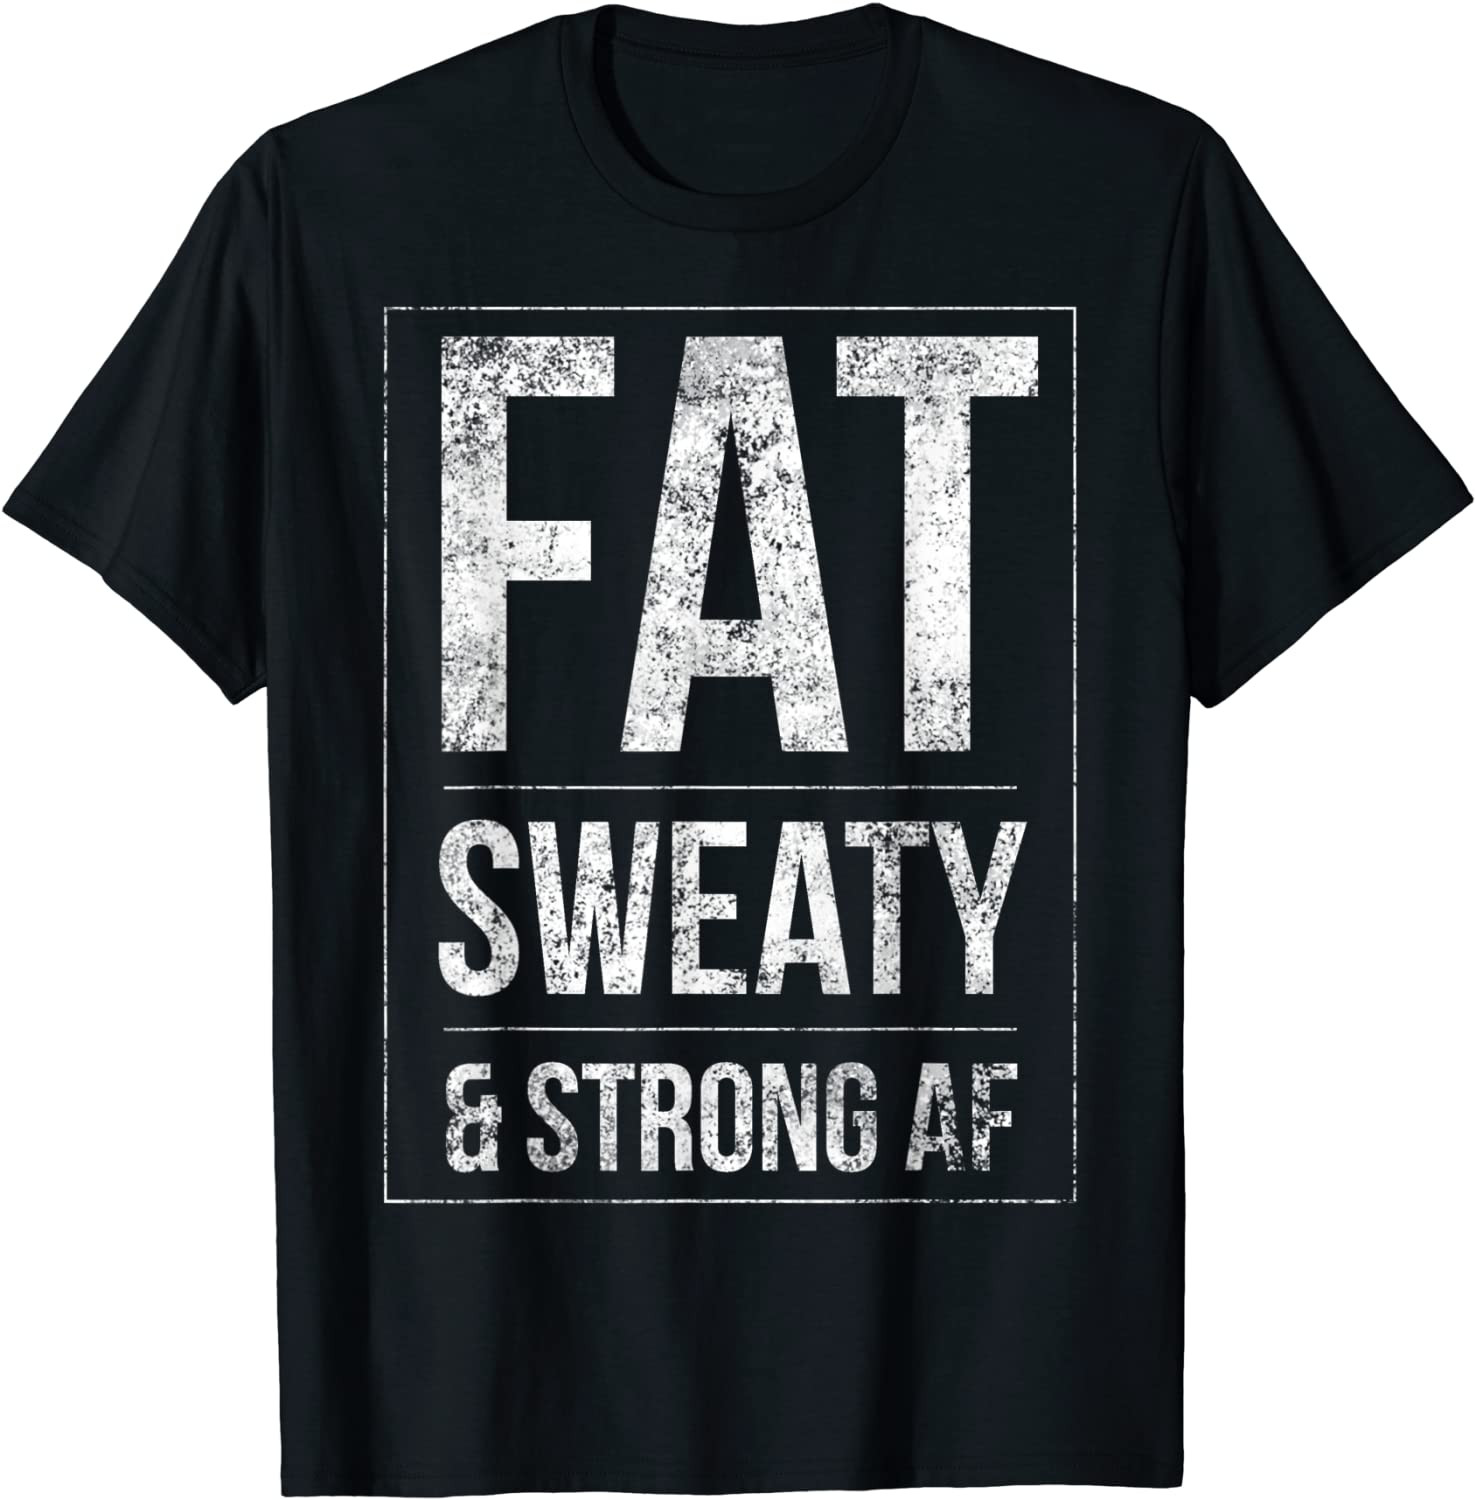 Funny Powerlifter Fat Strongman Powerlifting Strong & Heavy